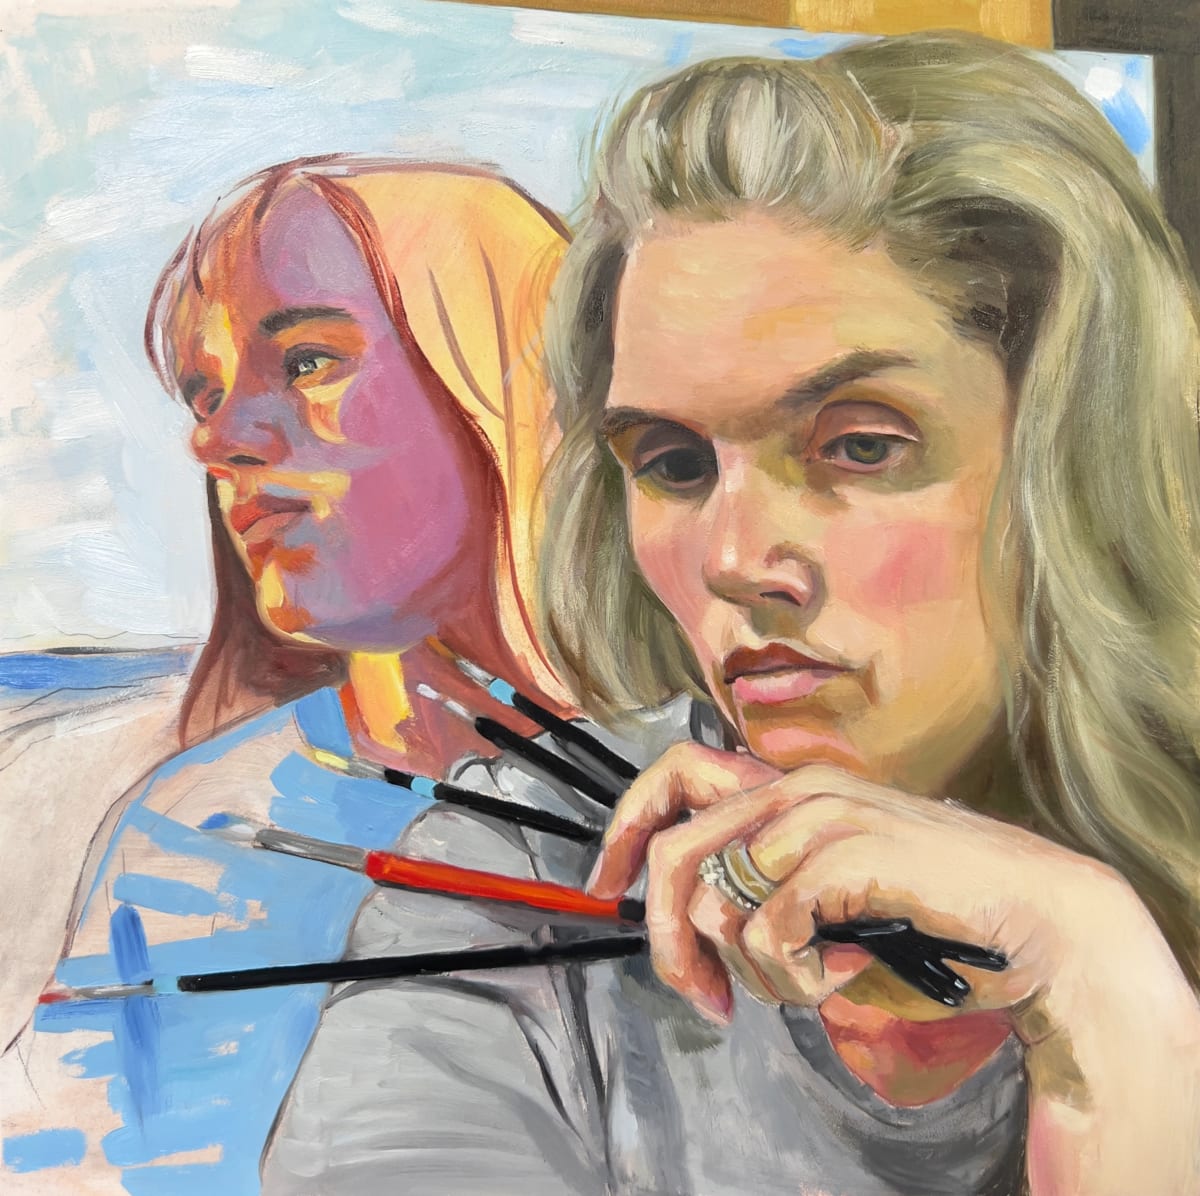 Work in Progress by Ellen Starr Lyon  Image: A self-portrait of the artist contemplating the new work she's started behind her and of course everything else.